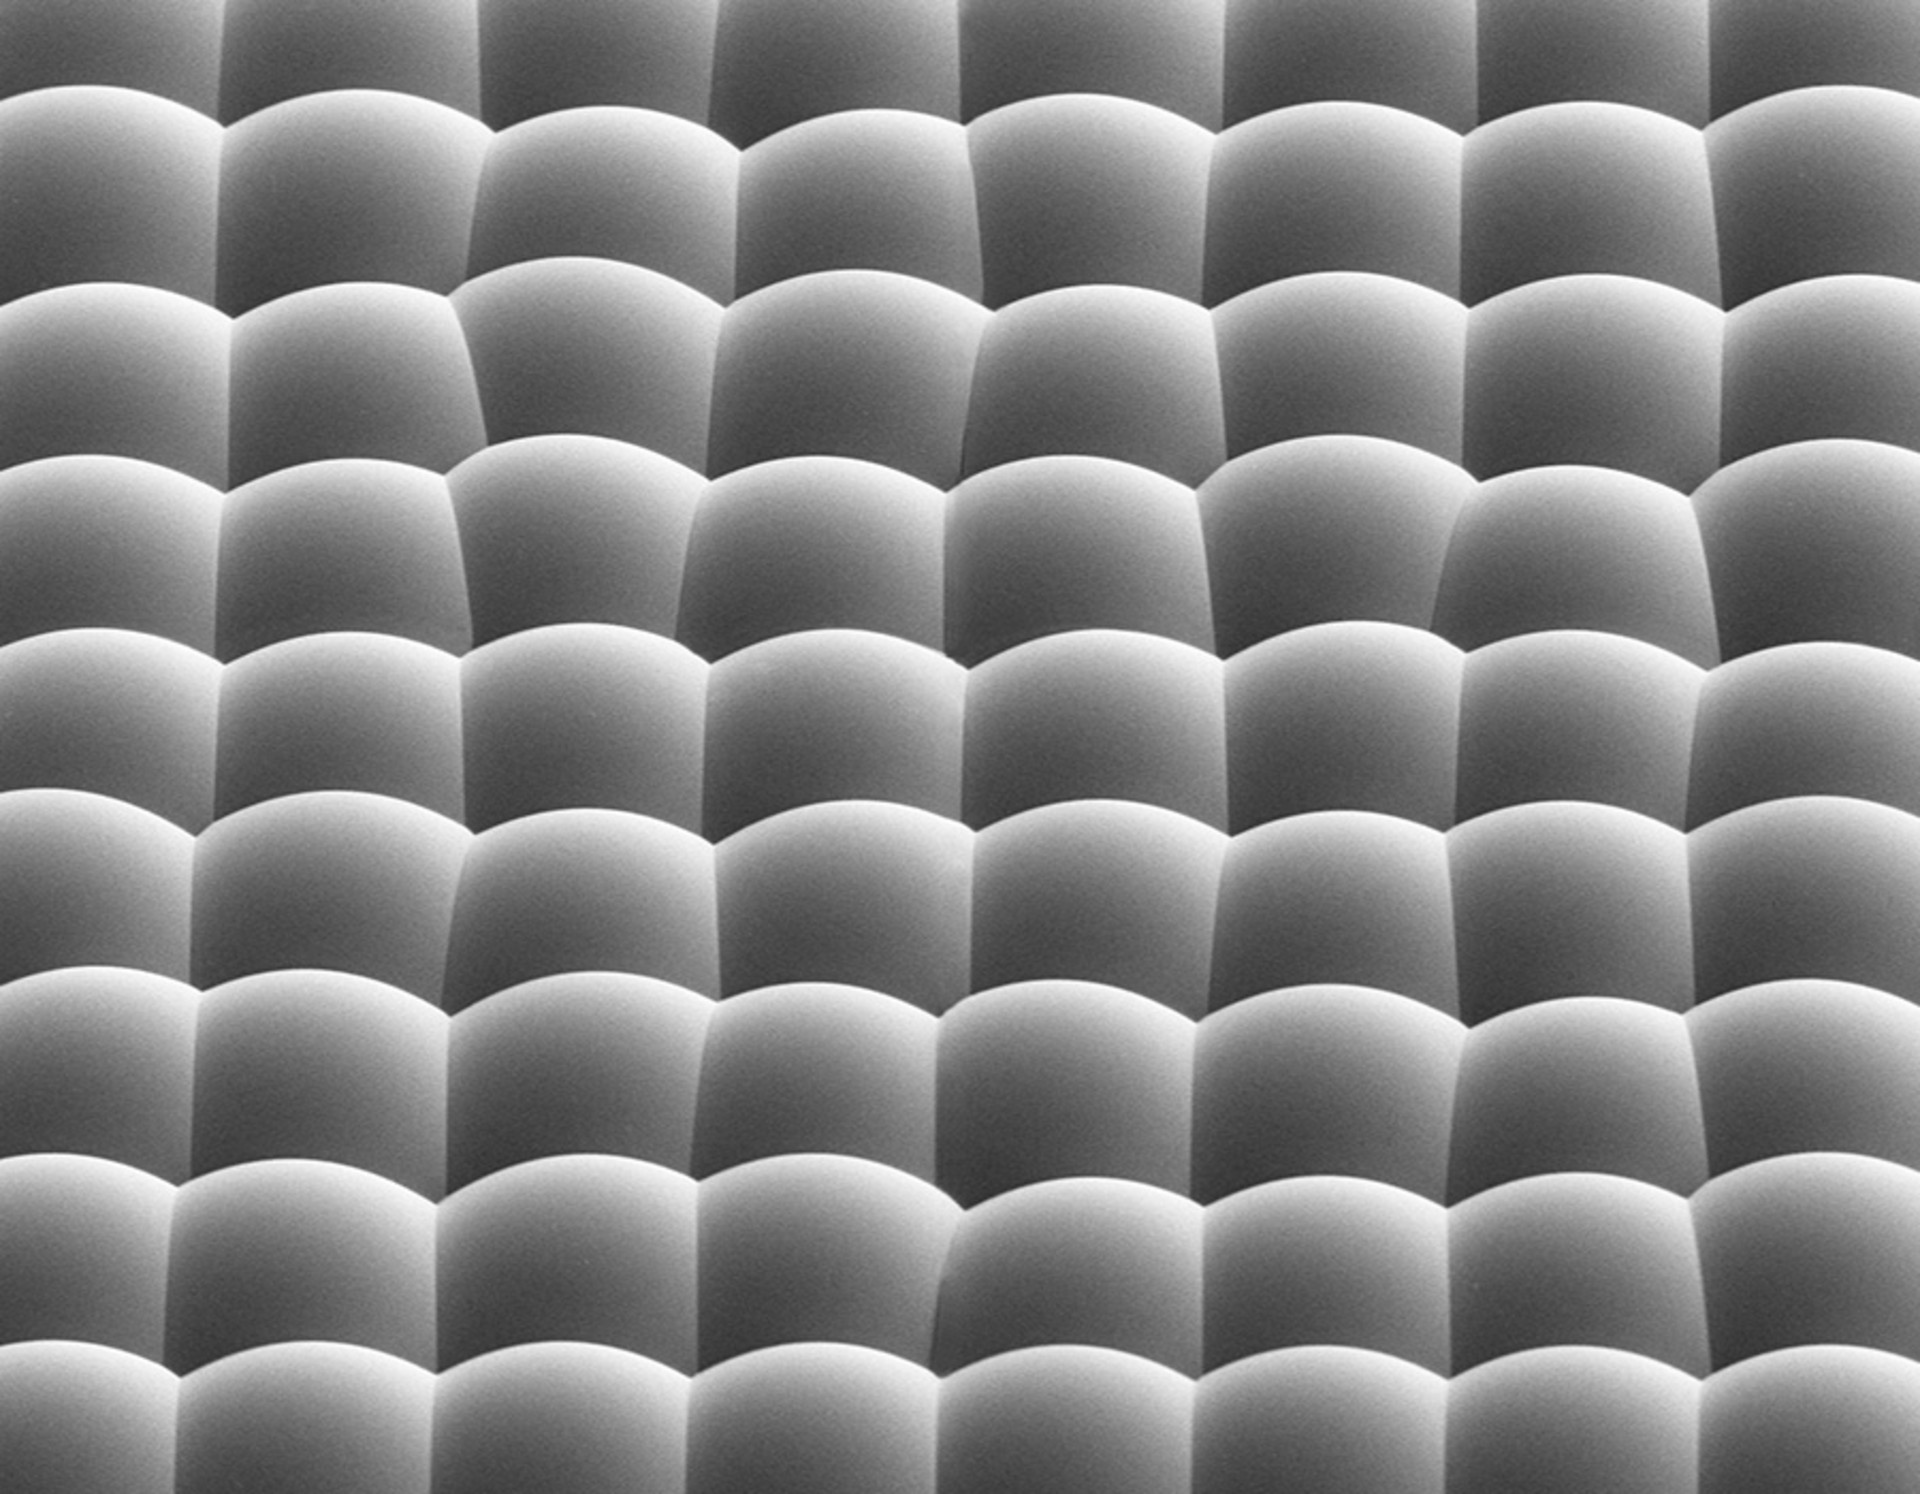 Densely packed microoptics in a random microlens array for diffuser applications